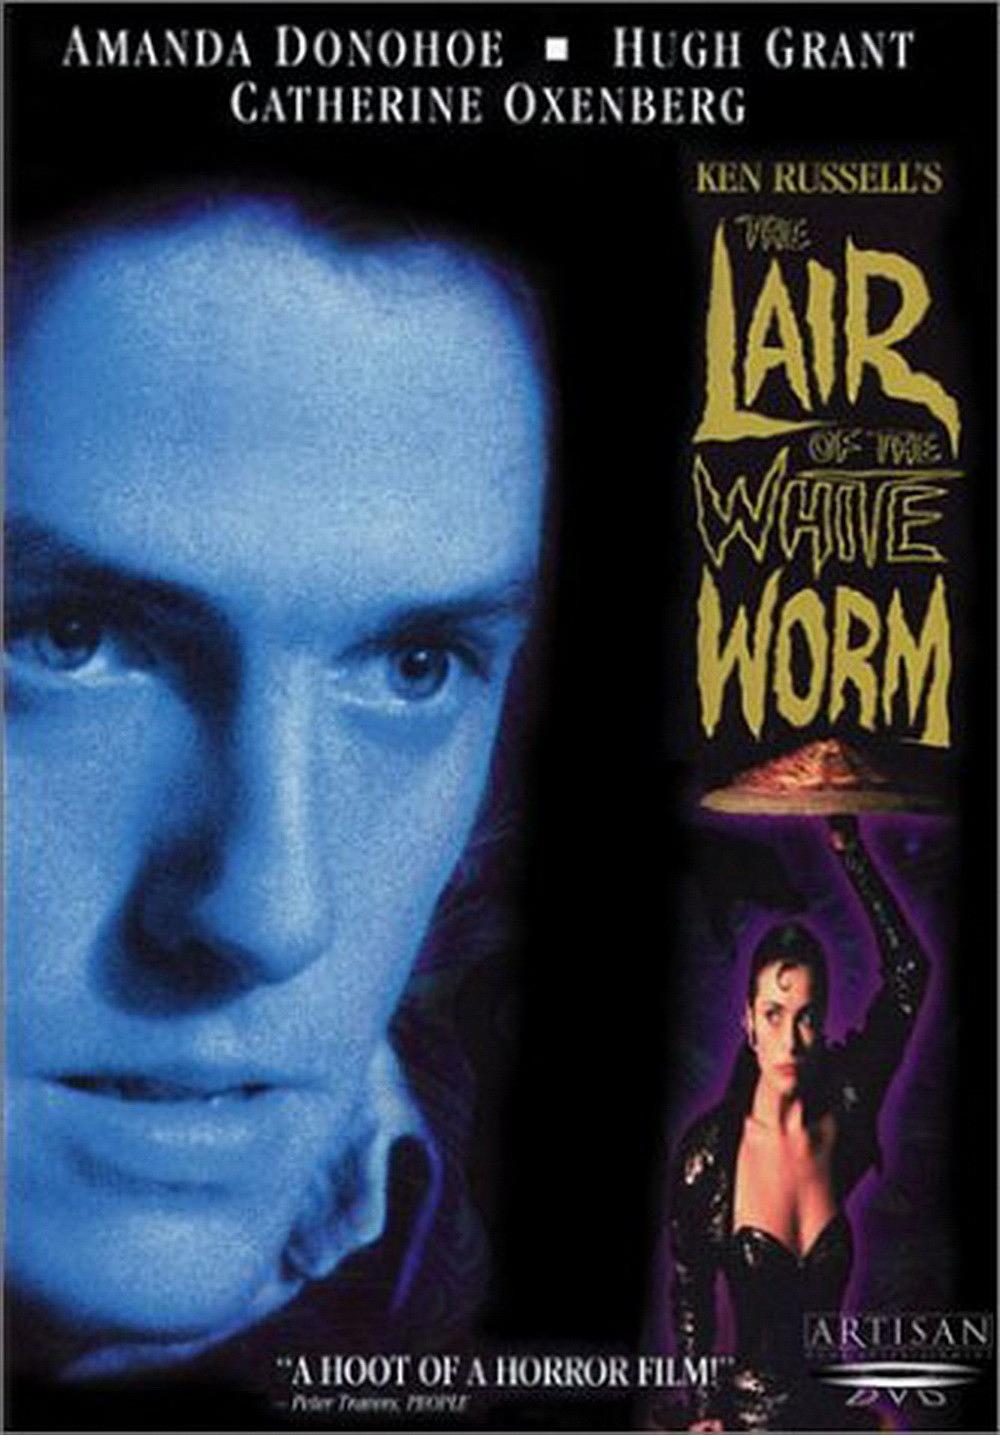 ߴ˵/ The.Lair.of.the.White.Worm.1988.1080p.BluRay.REMUX.AVC.DD2.0-FGT 15.45GB-1.png